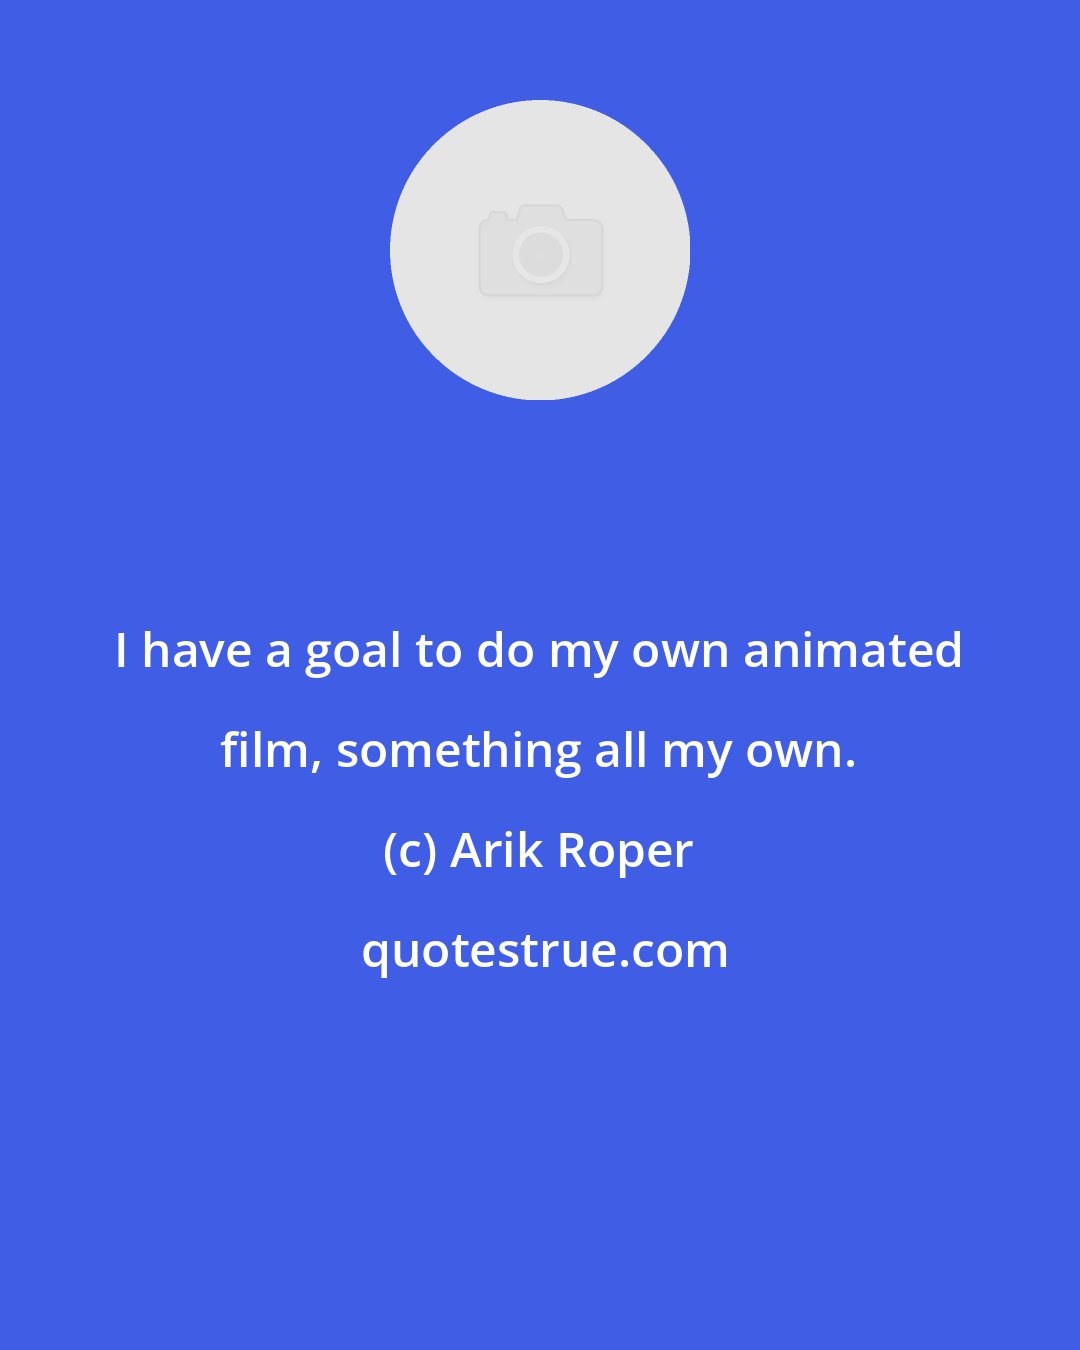 Arik Roper: I have a goal to do my own animated film, something all my own.